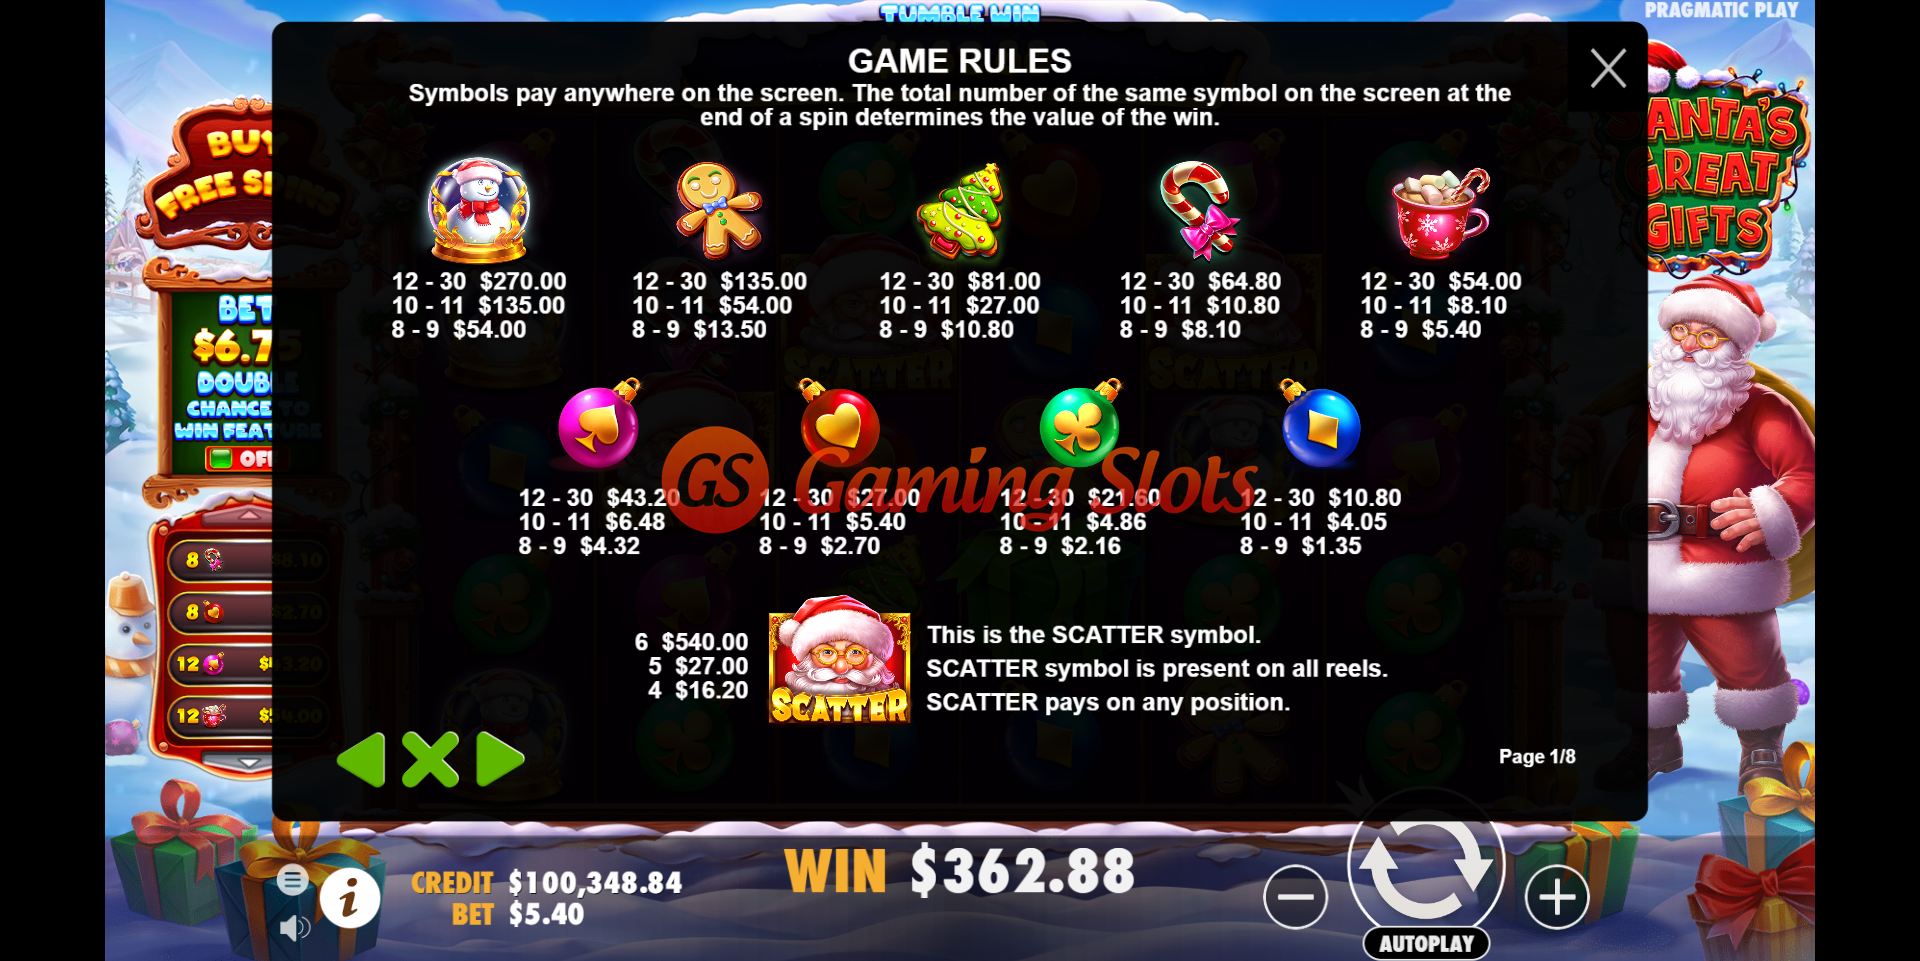 Game Rules for Santa's Great Gifts slot from Pragmatic Play